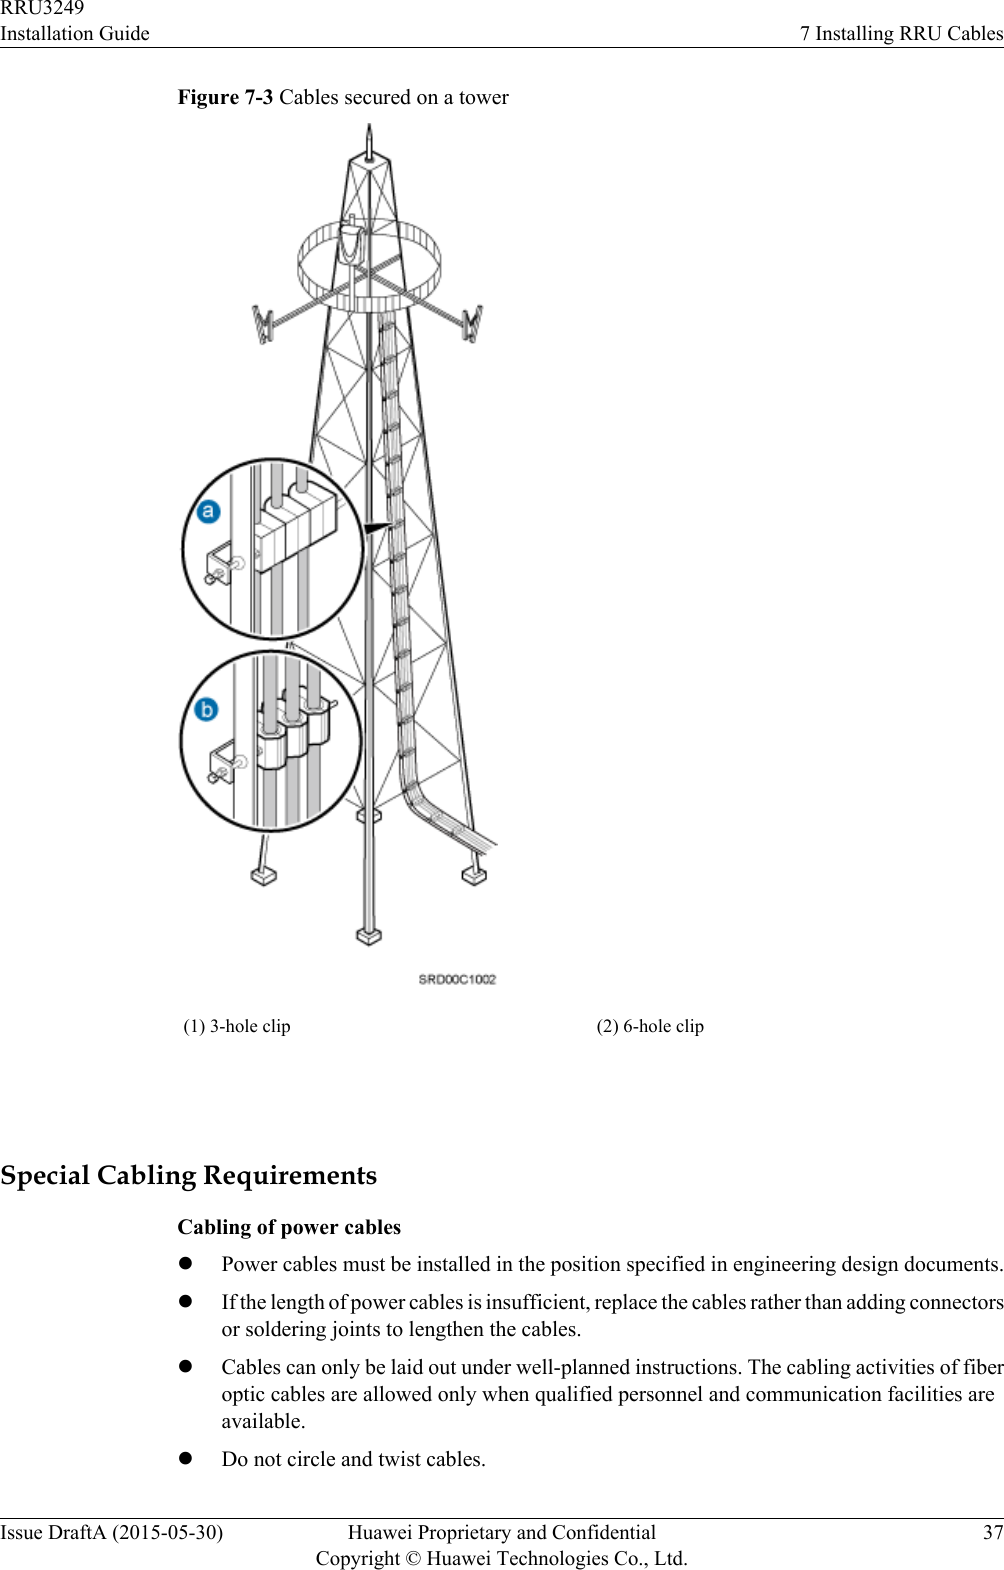 Figure 7-3 Cables secured on a tower(1) 3-hole clip (2) 6-hole clip Special Cabling RequirementsCabling of power cableslPower cables must be installed in the position specified in engineering design documents.lIf the length of power cables is insufficient, replace the cables rather than adding connectorsor soldering joints to lengthen the cables.lCables can only be laid out under well-planned instructions. The cabling activities of fiberoptic cables are allowed only when qualified personnel and communication facilities areavailable.lDo not circle and twist cables.RRU3249Installation Guide 7 Installing RRU CablesIssue DraftA (2015-05-30) Huawei Proprietary and ConfidentialCopyright © Huawei Technologies Co., Ltd.37